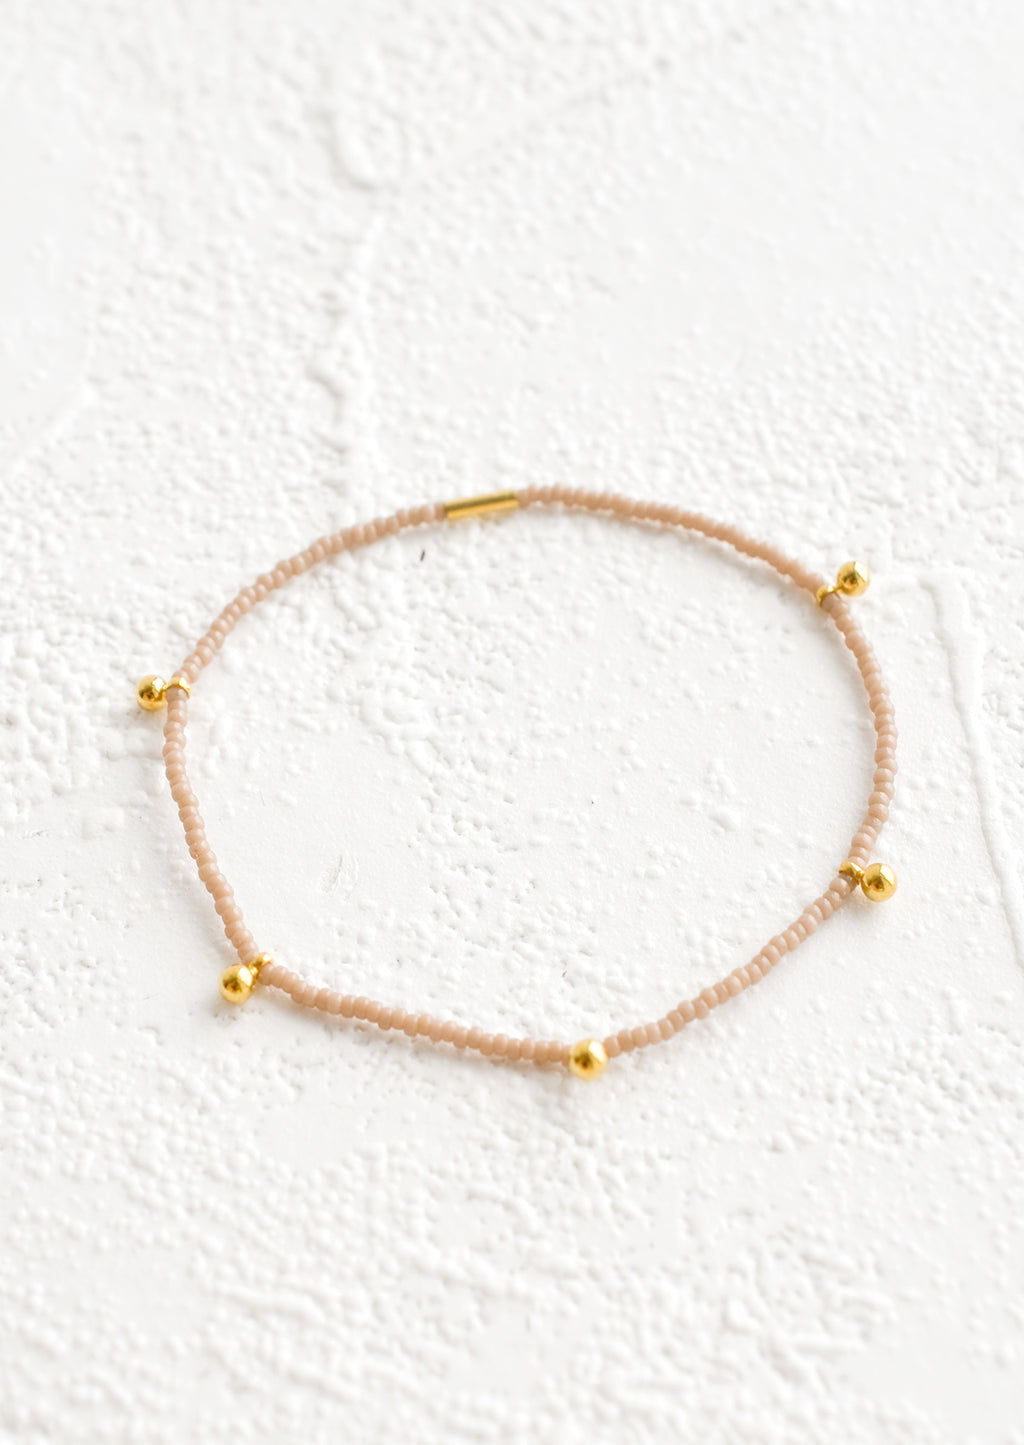 Chai: Bracelet made from tan colored glass seed beads with brass ball accent charms and logo tag